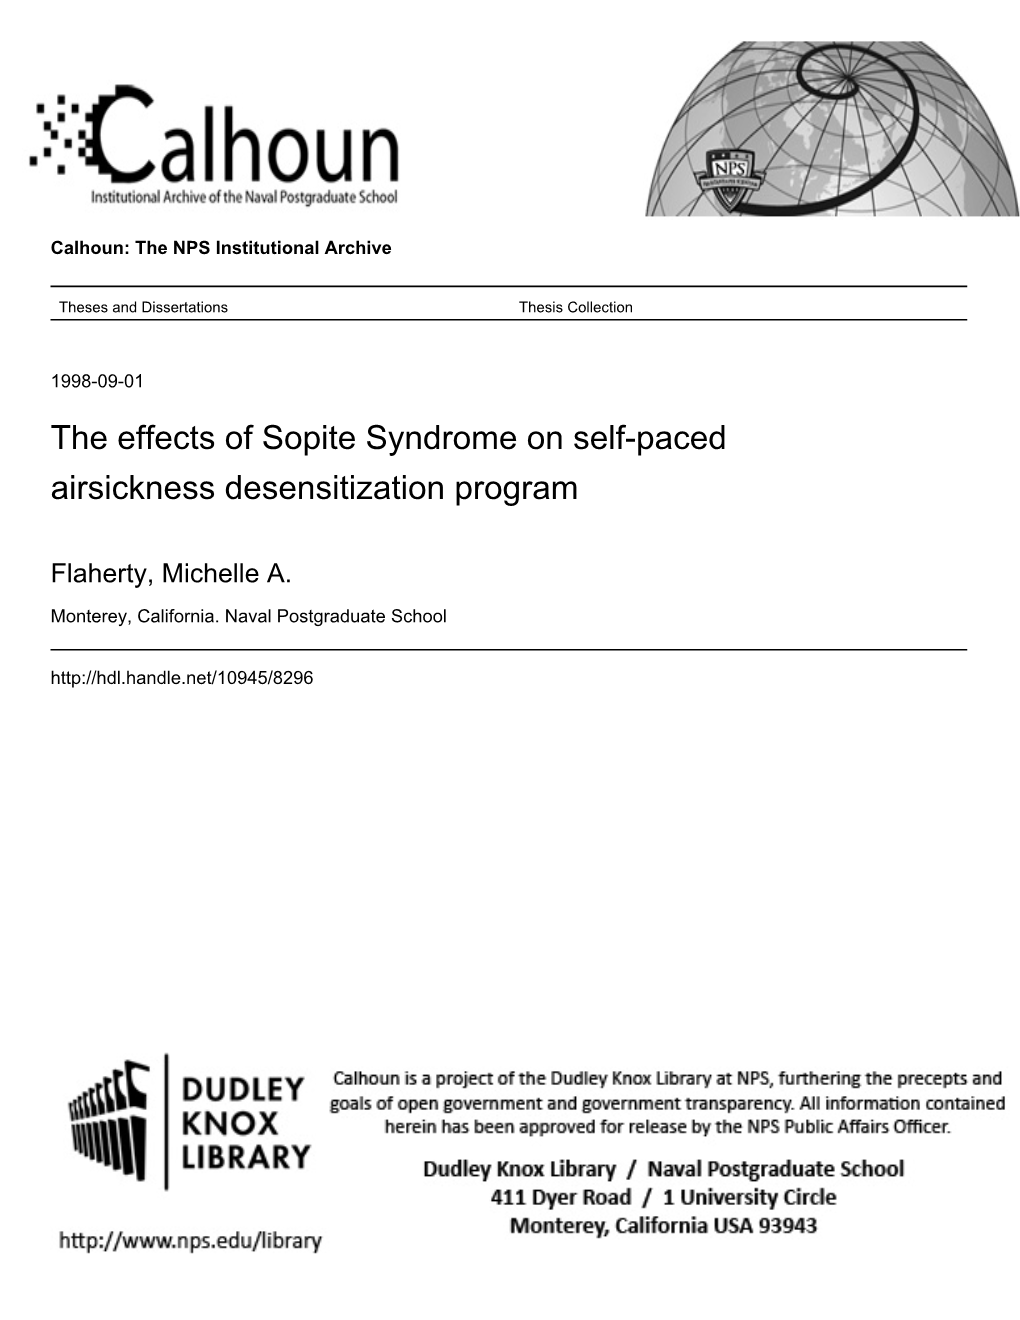 The Effects of Sopite Syndrome on Self-Paced Airsickness Desensitization Program